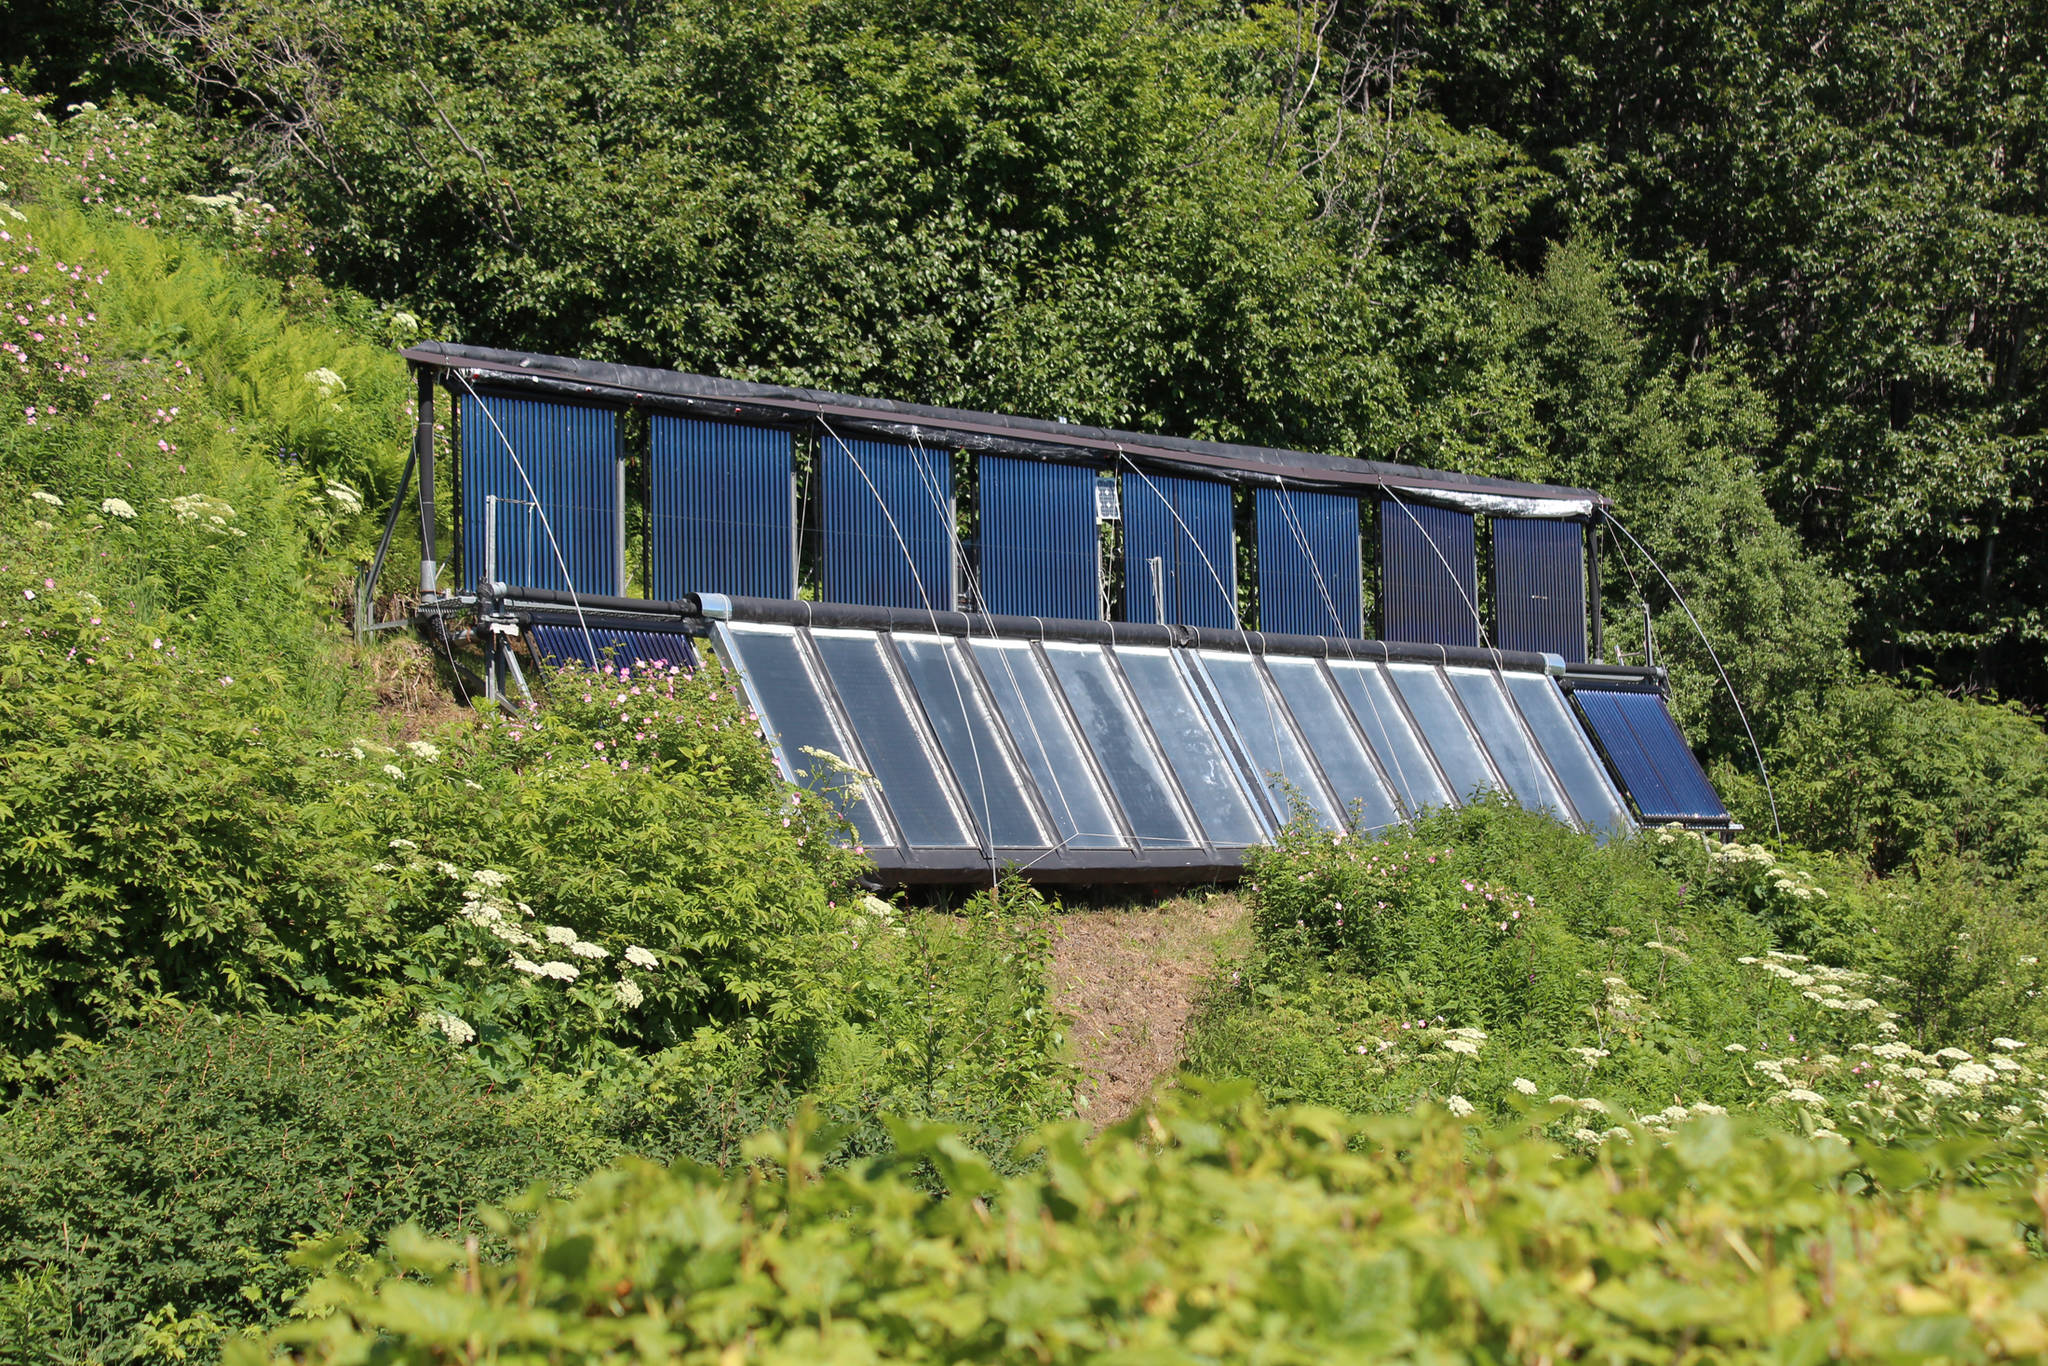 Several solar panels rest in the sun up an incline at the Dean family farm Friday, July 6, 2018 at their home off East End Road near Homer, Alaska. Artist Jeff Dean uses solar power to supplement a boiler system in place at their home, which was part of the annual Homer Solar Tour this year. (Photo by Megan Pacer/Homer News)